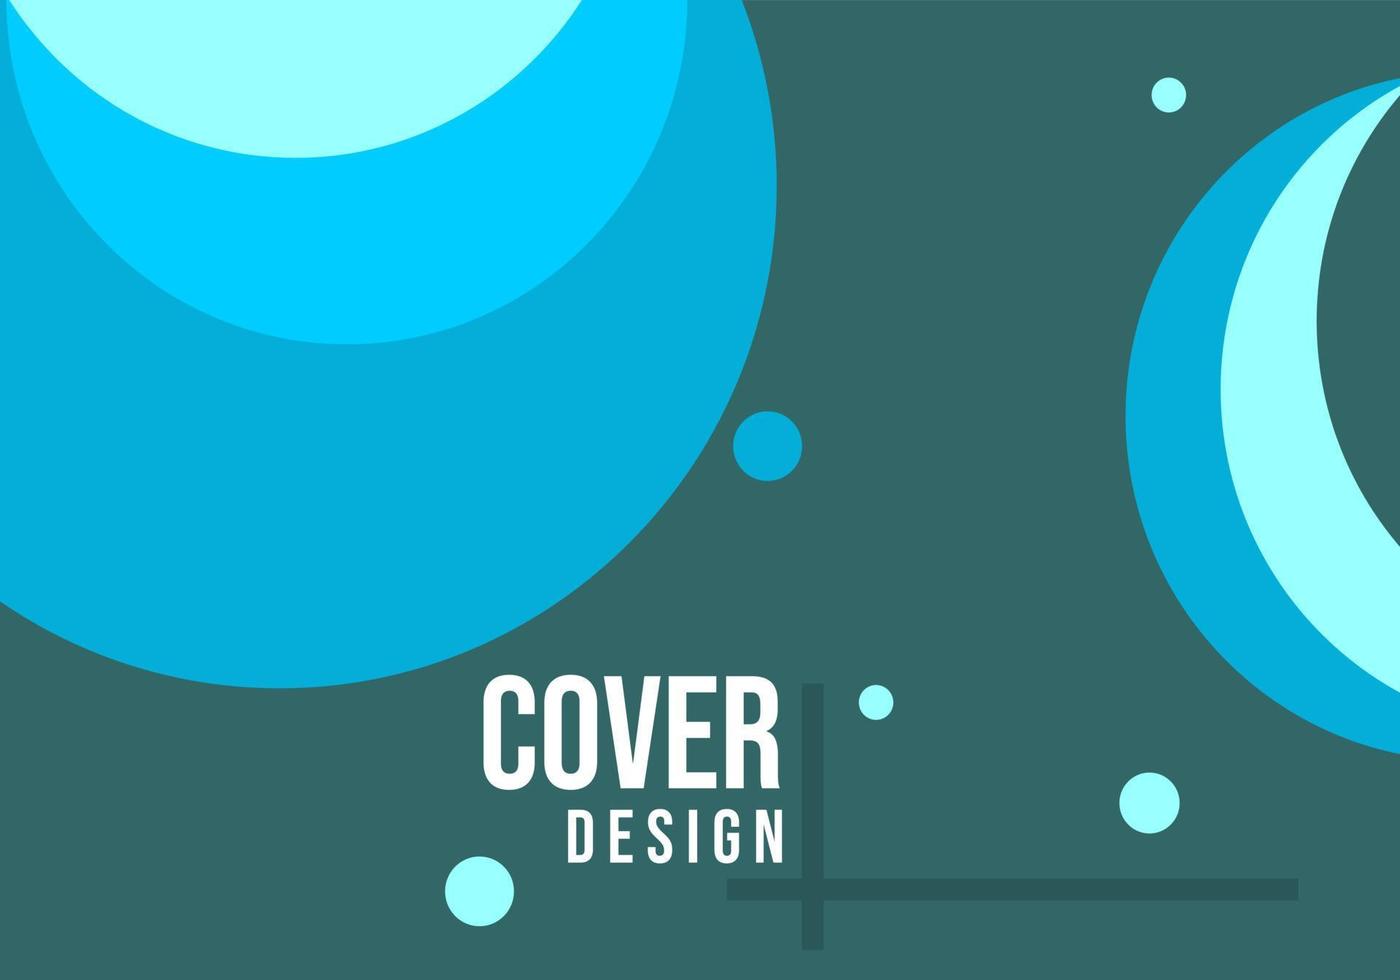 Abstract trendy cover design. geometric style background vector